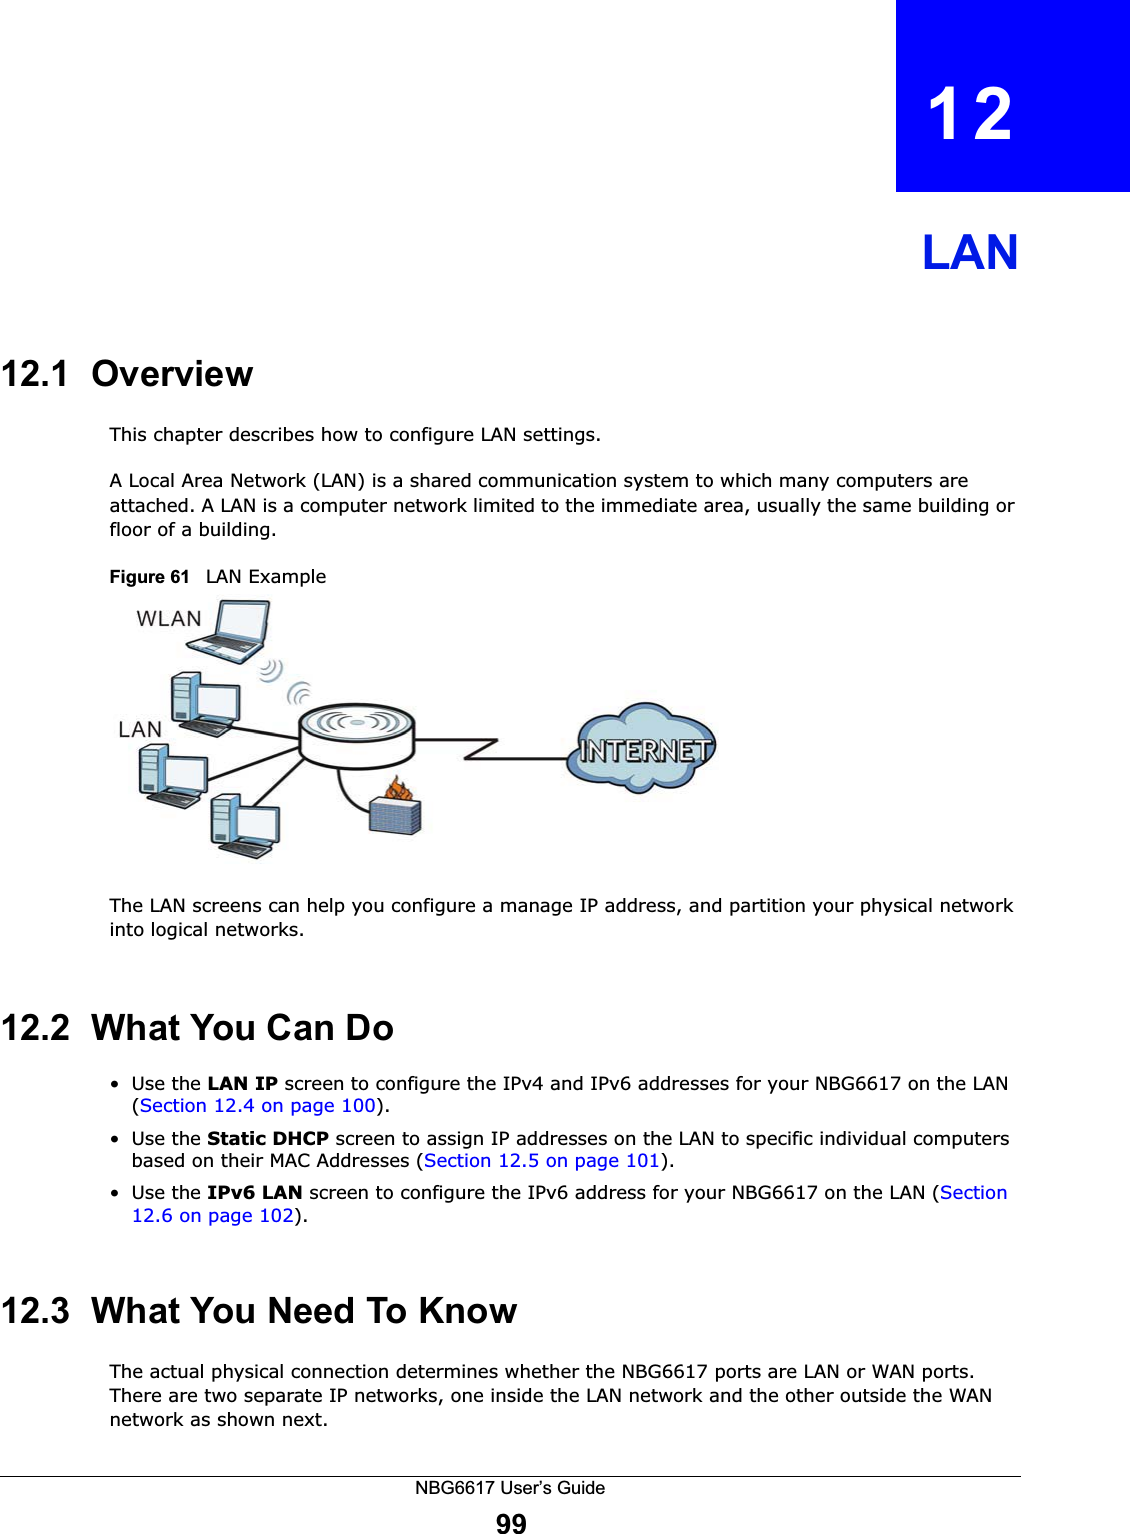 NBG6617 User’s Guide99CHAPTER   12LAN12.1  OverviewThis chapter describes how to configure LAN settings.A Local Area Network (LAN) is a shared communication system to which many computers are attached. A LAN is a computer network limited to the immediate area, usually the same building or floor of a building. Figure 61   LAN ExampleThe LAN screens can help you configure a manage IP address, and partition your physical network into logical networks.12.2  What You Can Do•Use the LAN IP screen to configure the IPv4 and IPv6 addresses for your NBG6617 on the LAN (Section 12.4 on page 100).•Use the Static DHCP screen to assign IP addresses on the LAN to specific individual computers based on their MAC Addresses (Section 12.5 on page 101).•Use the IPv6 LAN screen to configure the IPv6 address for your NBG6617 on the LAN (Section 12.6 on page 102).12.3  What You Need To KnowThe actual physical connection determines whether the NBG6617 ports are LAN or WAN ports. There are two separate IP networks, one inside the LAN network and the other outside the WAN network as shown next.